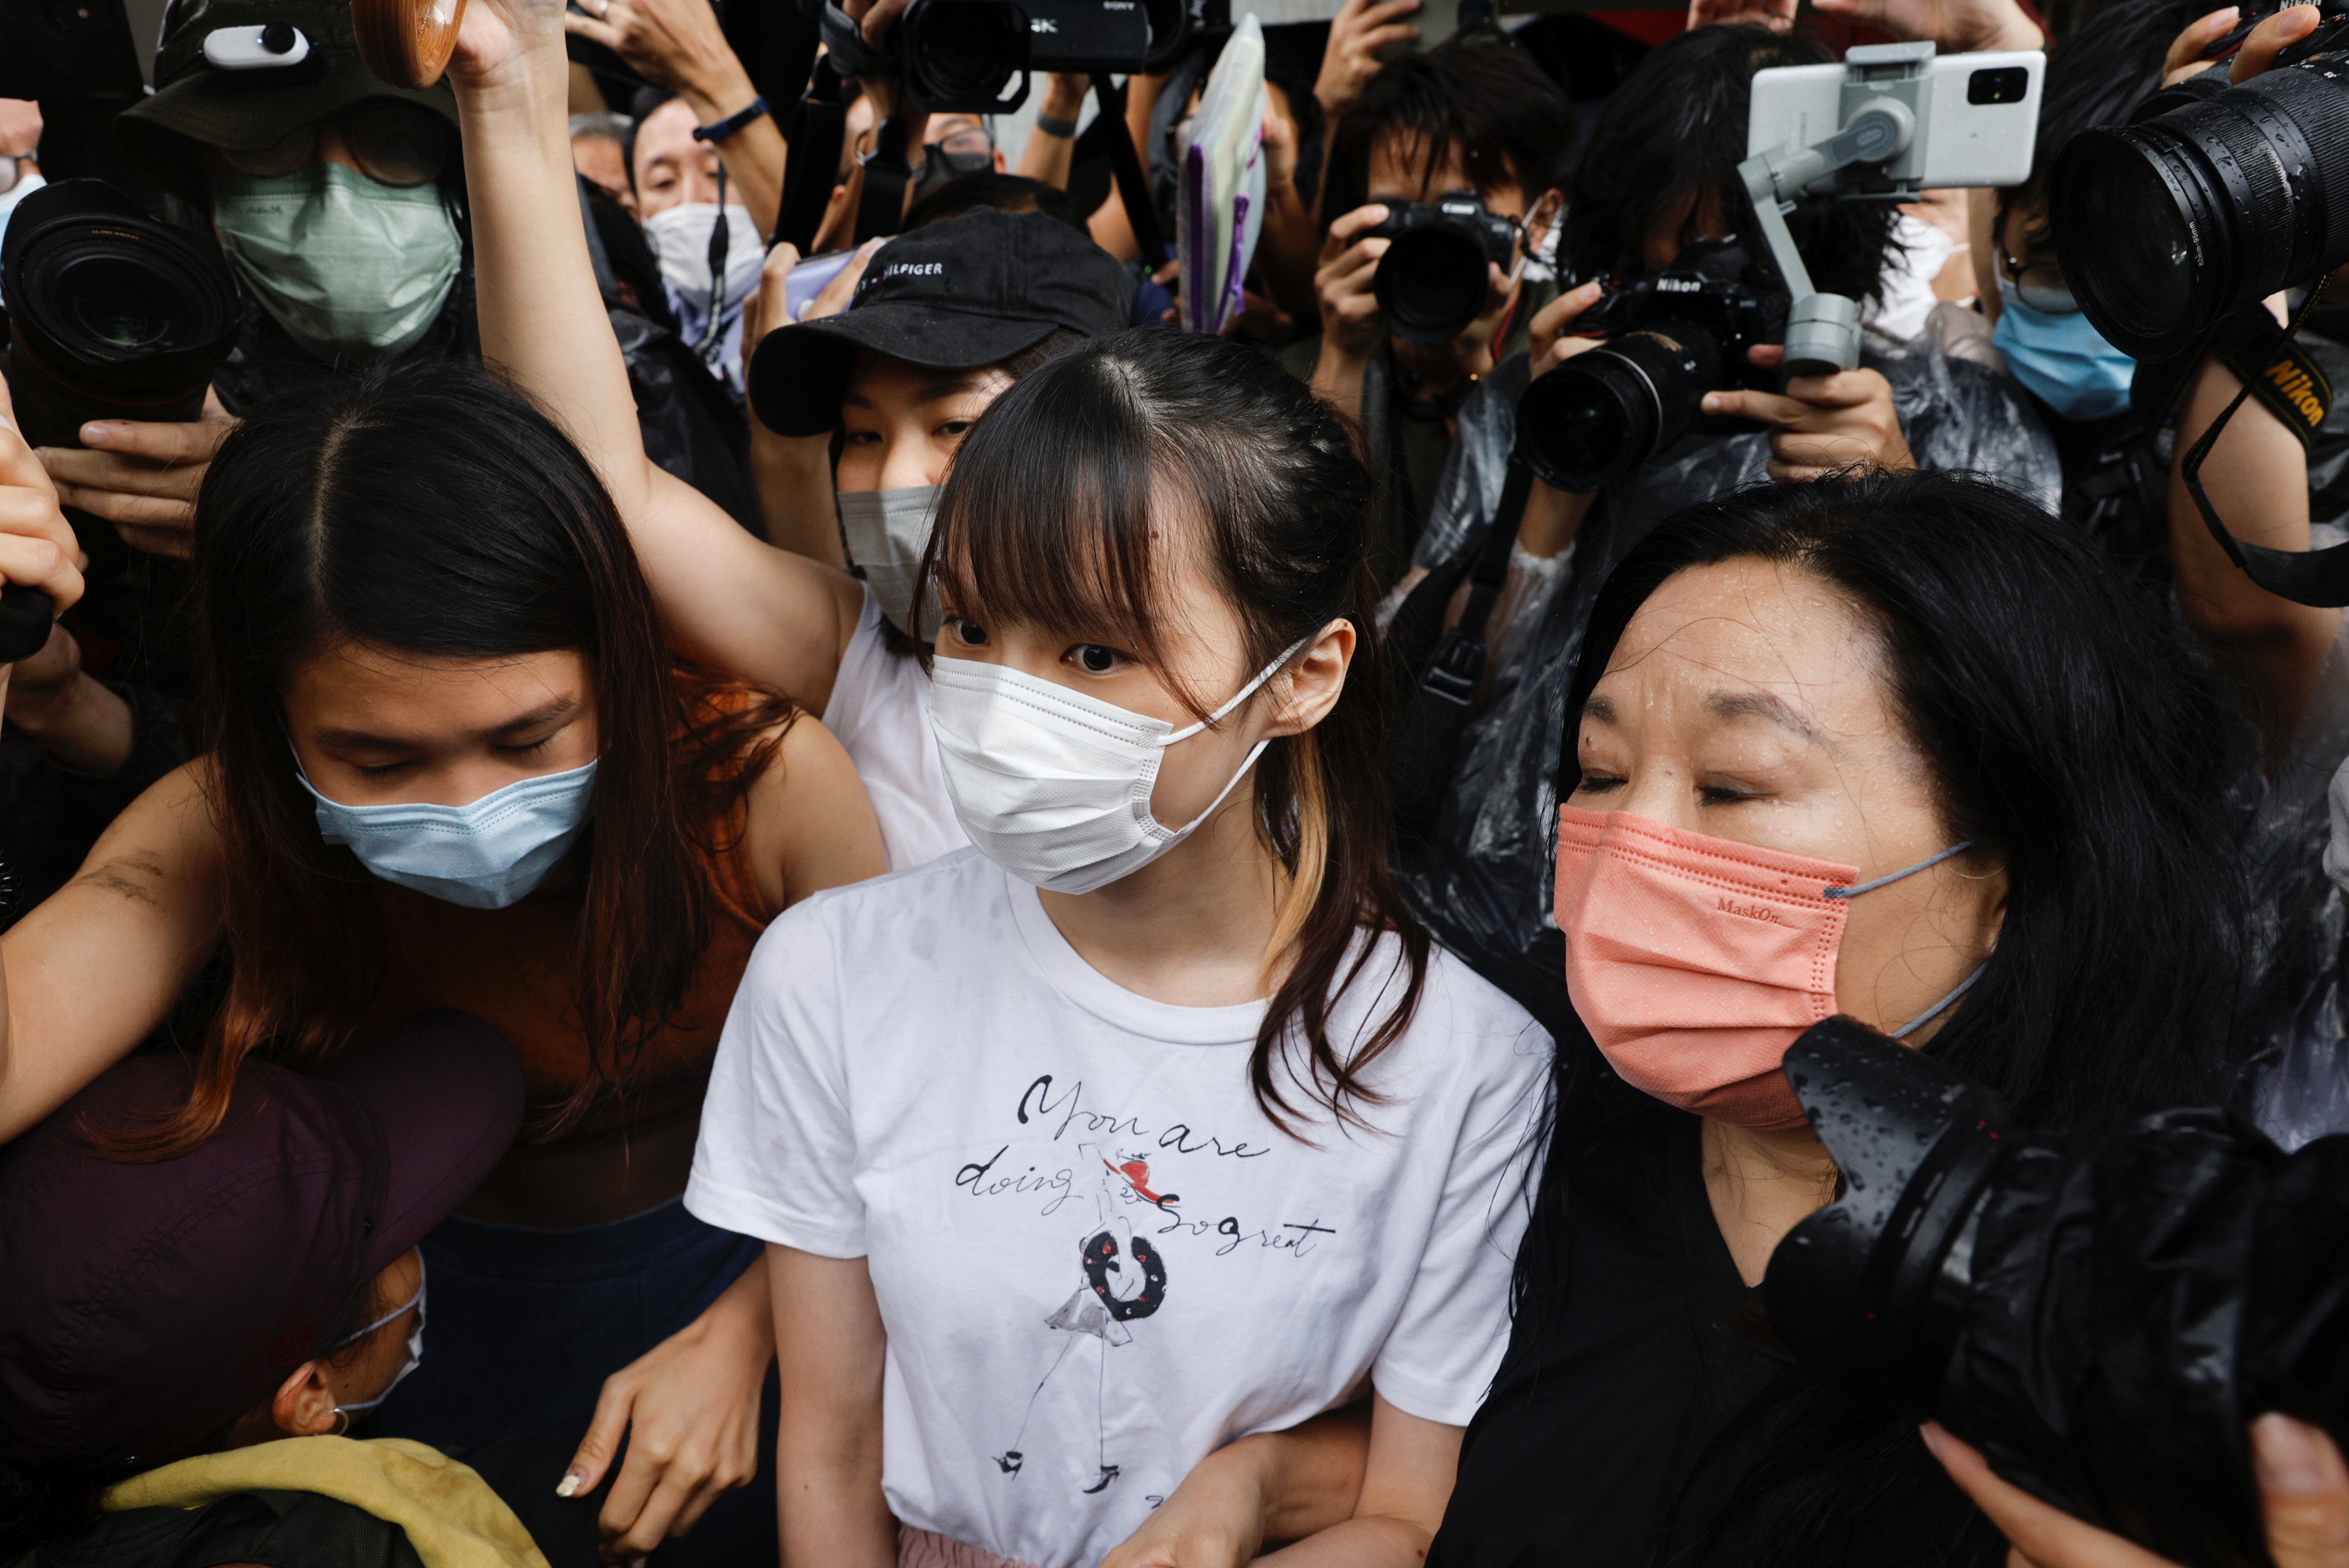 Pro-democracy activist Agnes Chow releases from prison after serving nearly seven months for her role in an unauthorised assembly during the city's 2019 anti-government protests, in Hong Kong